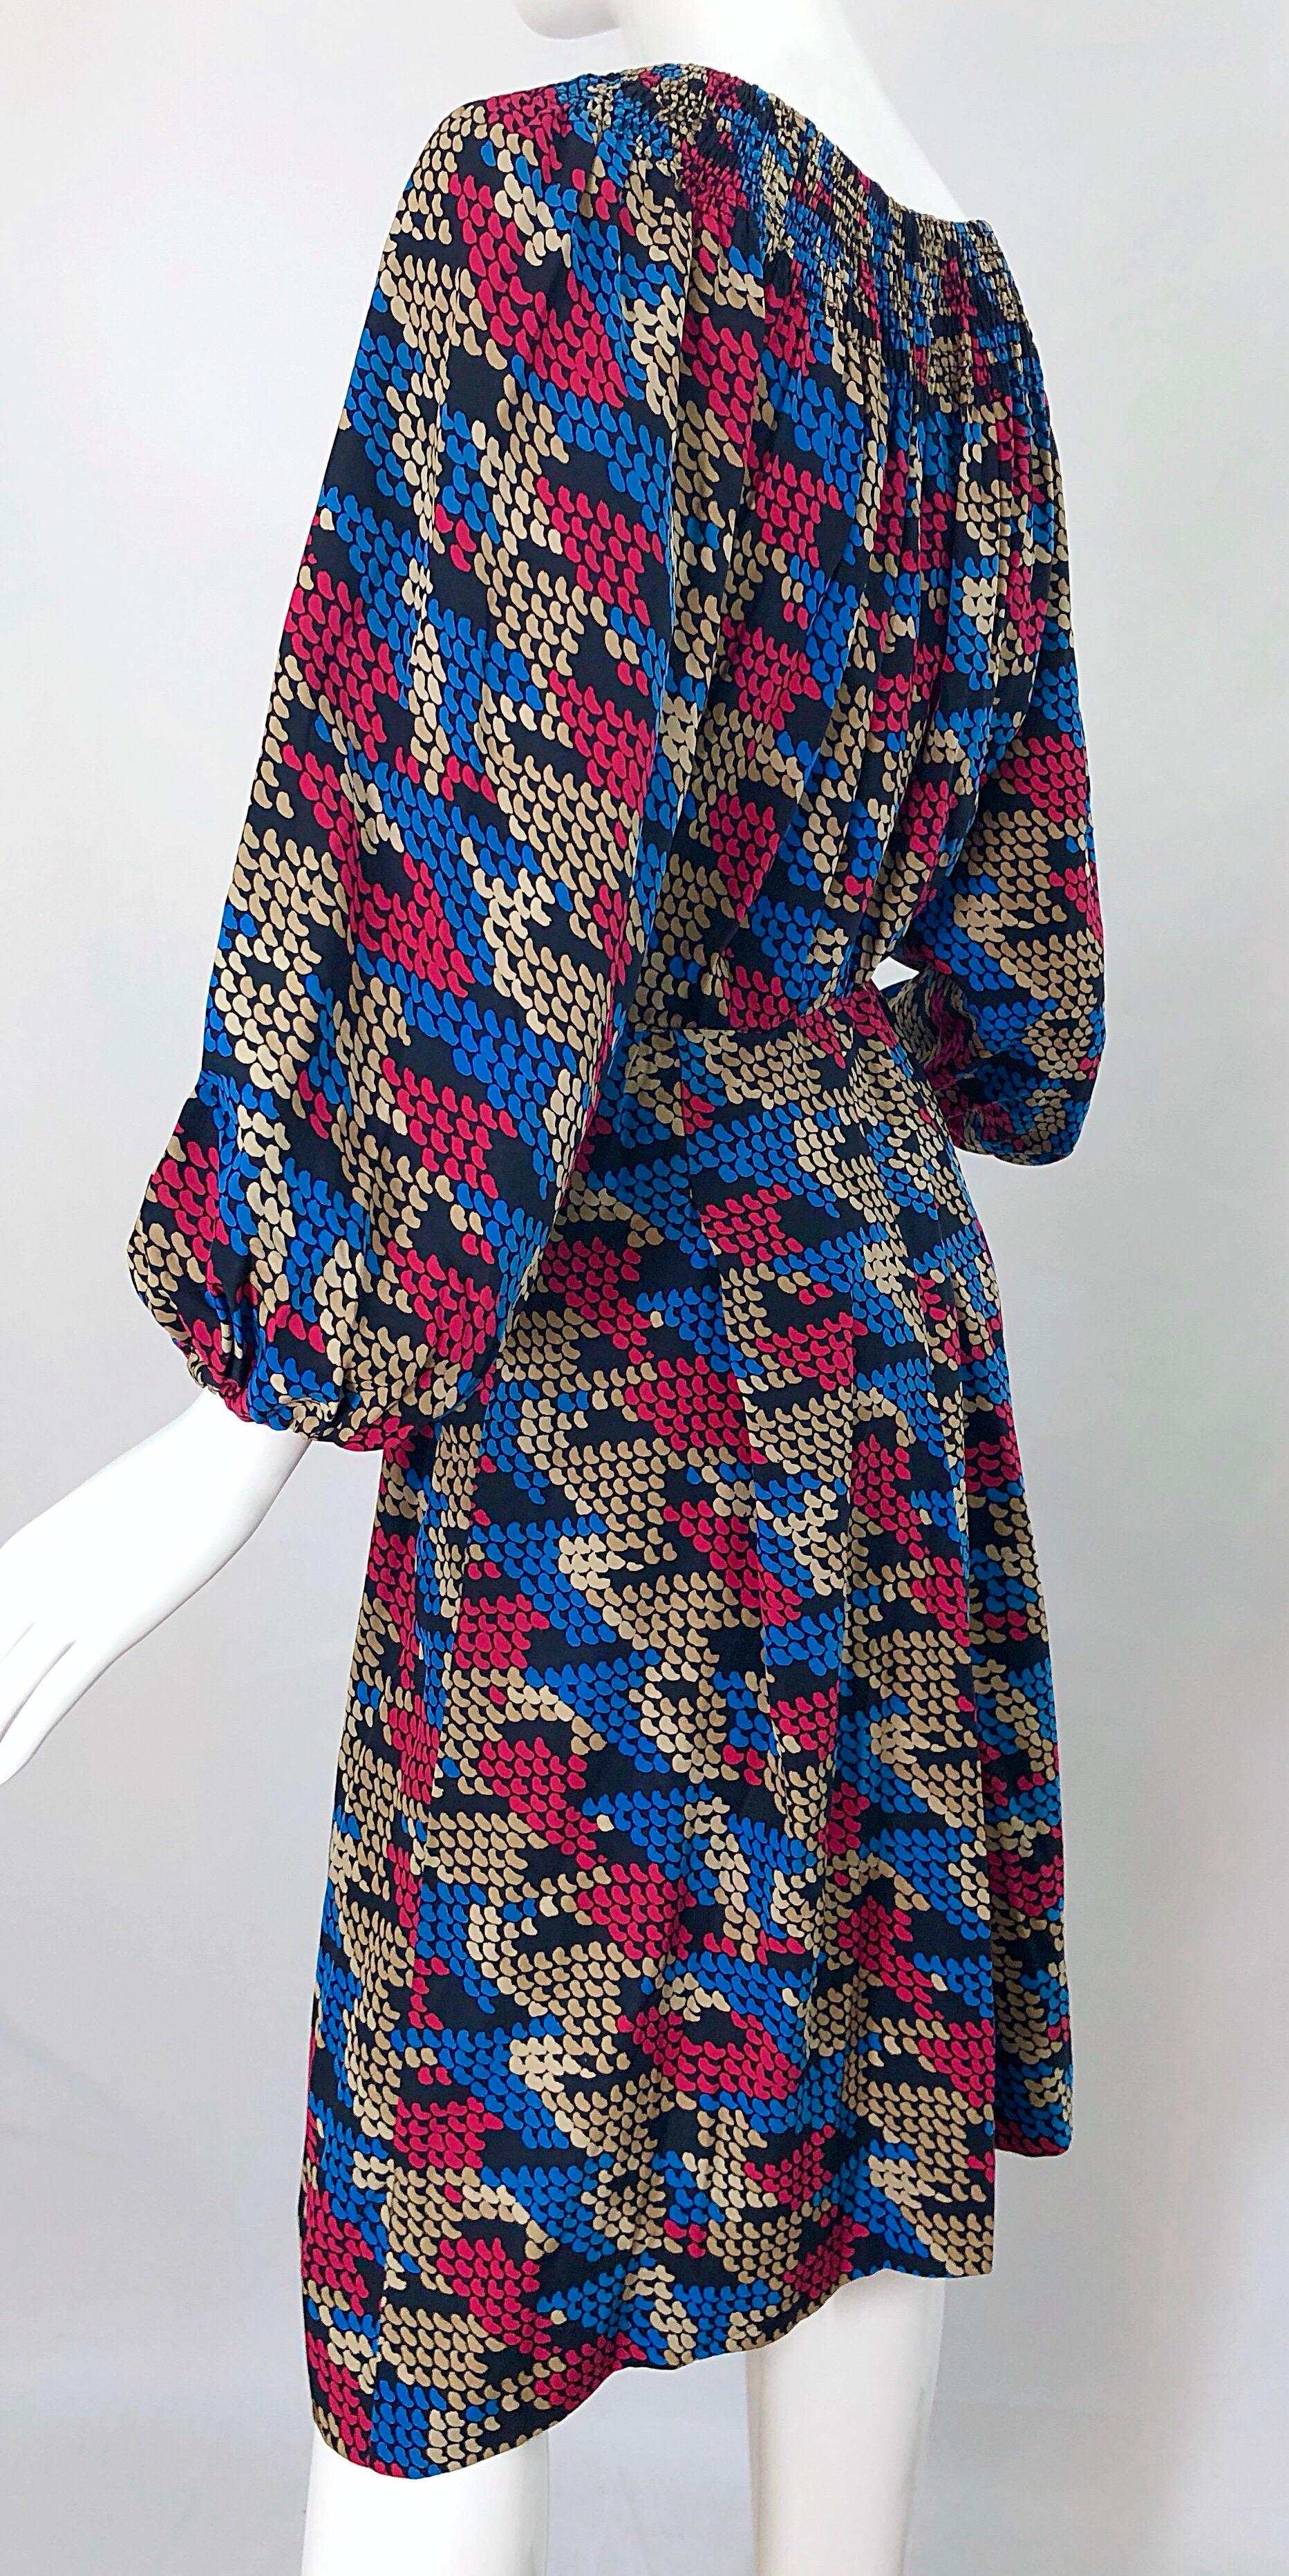 Givenchy Haute Couture 1970s Exaggerated Houndstooth Bishop Sleeve Vintage Dress For Sale 7